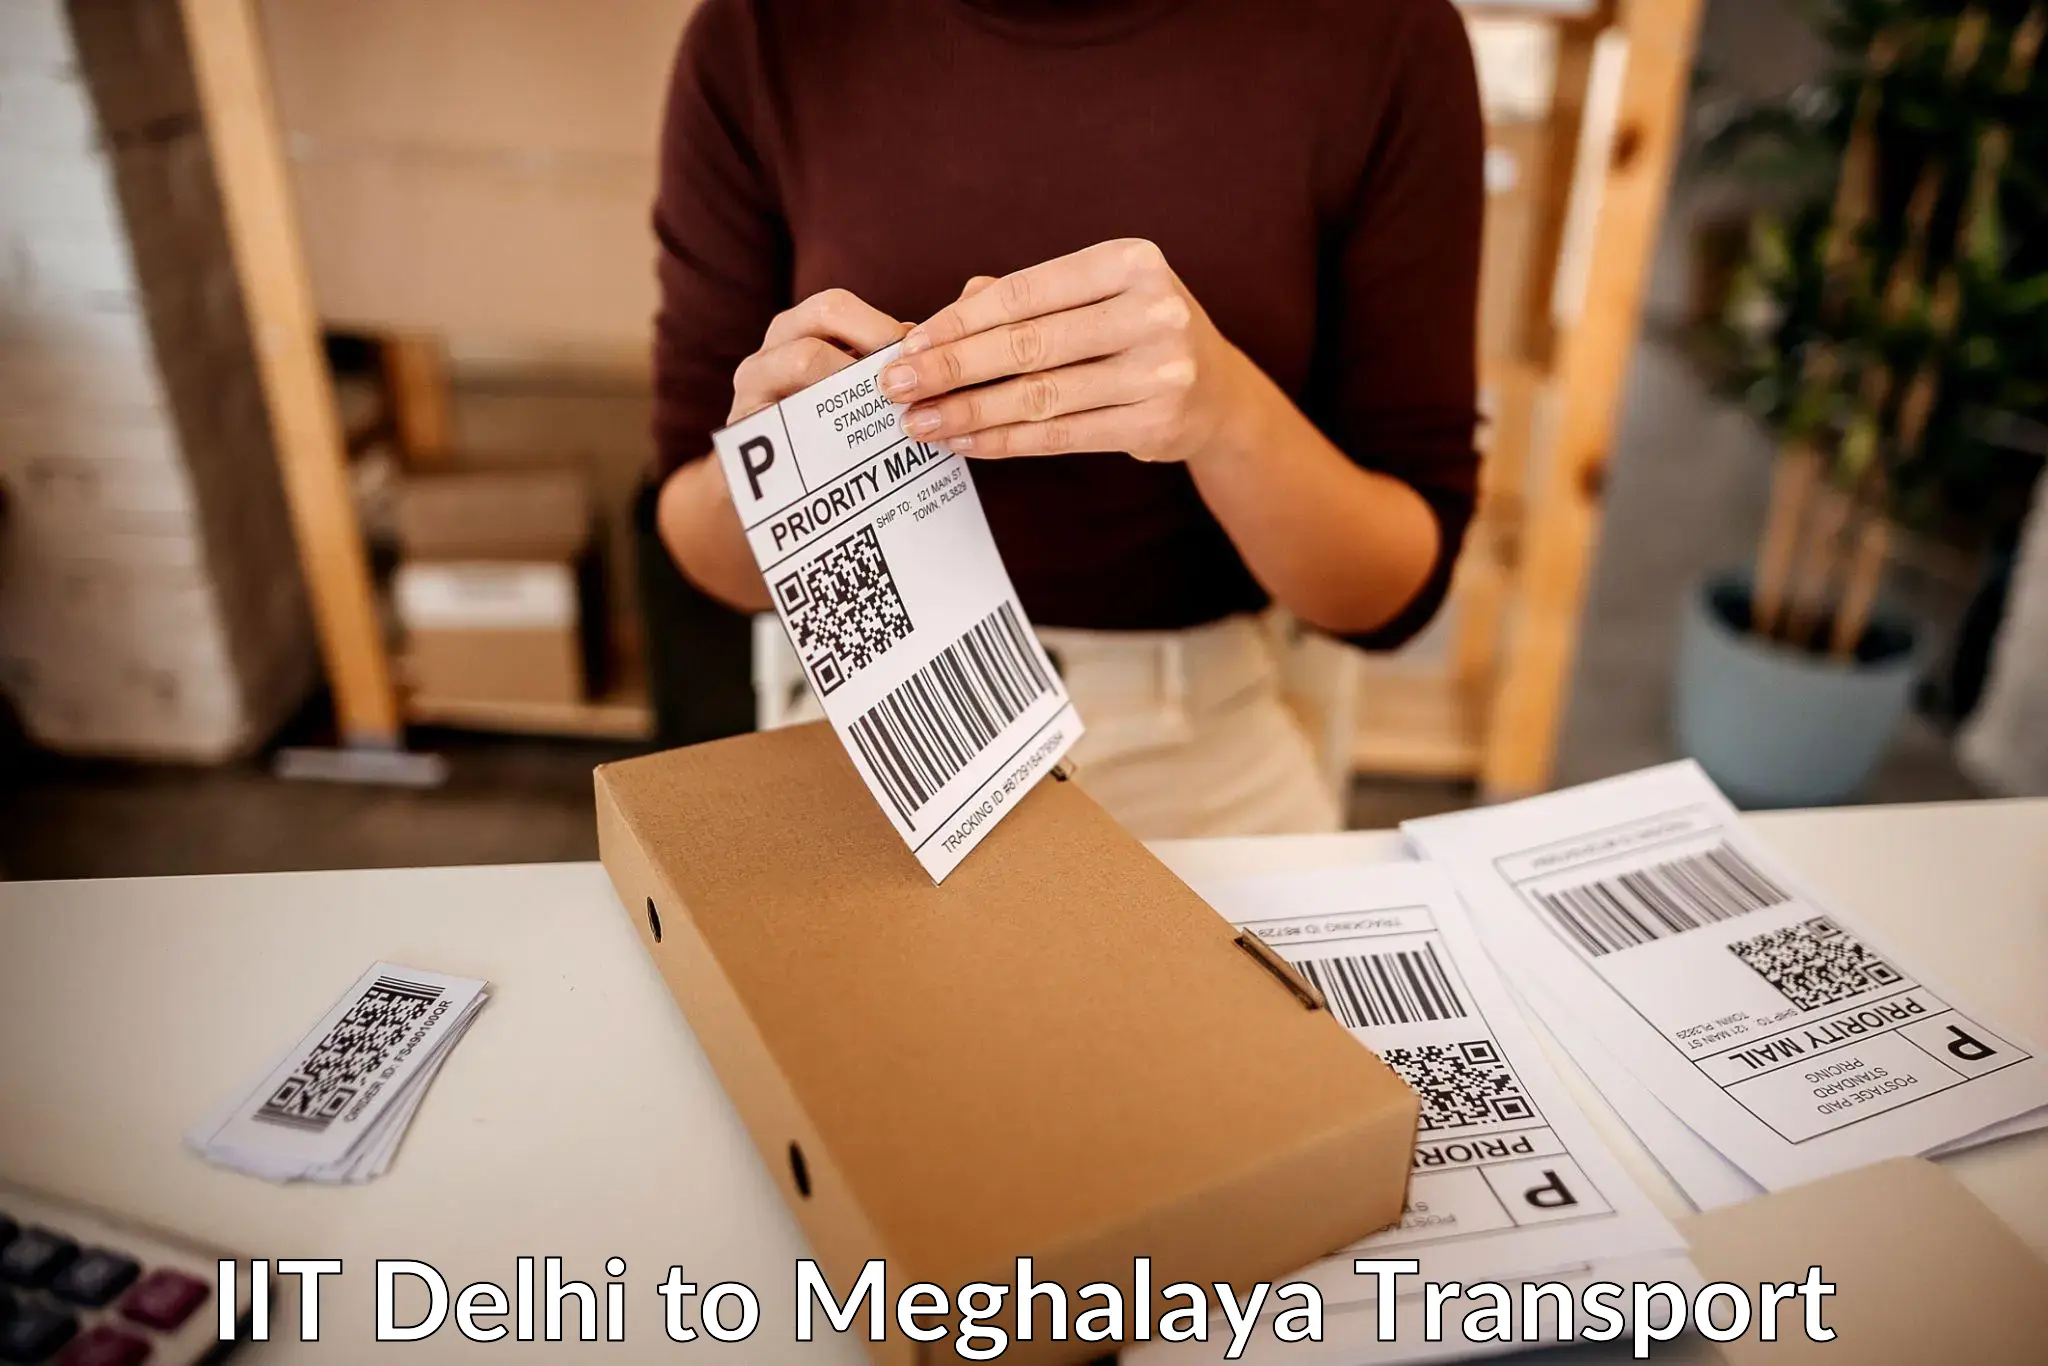 Express transport services in IIT Delhi to NIT Meghalaya